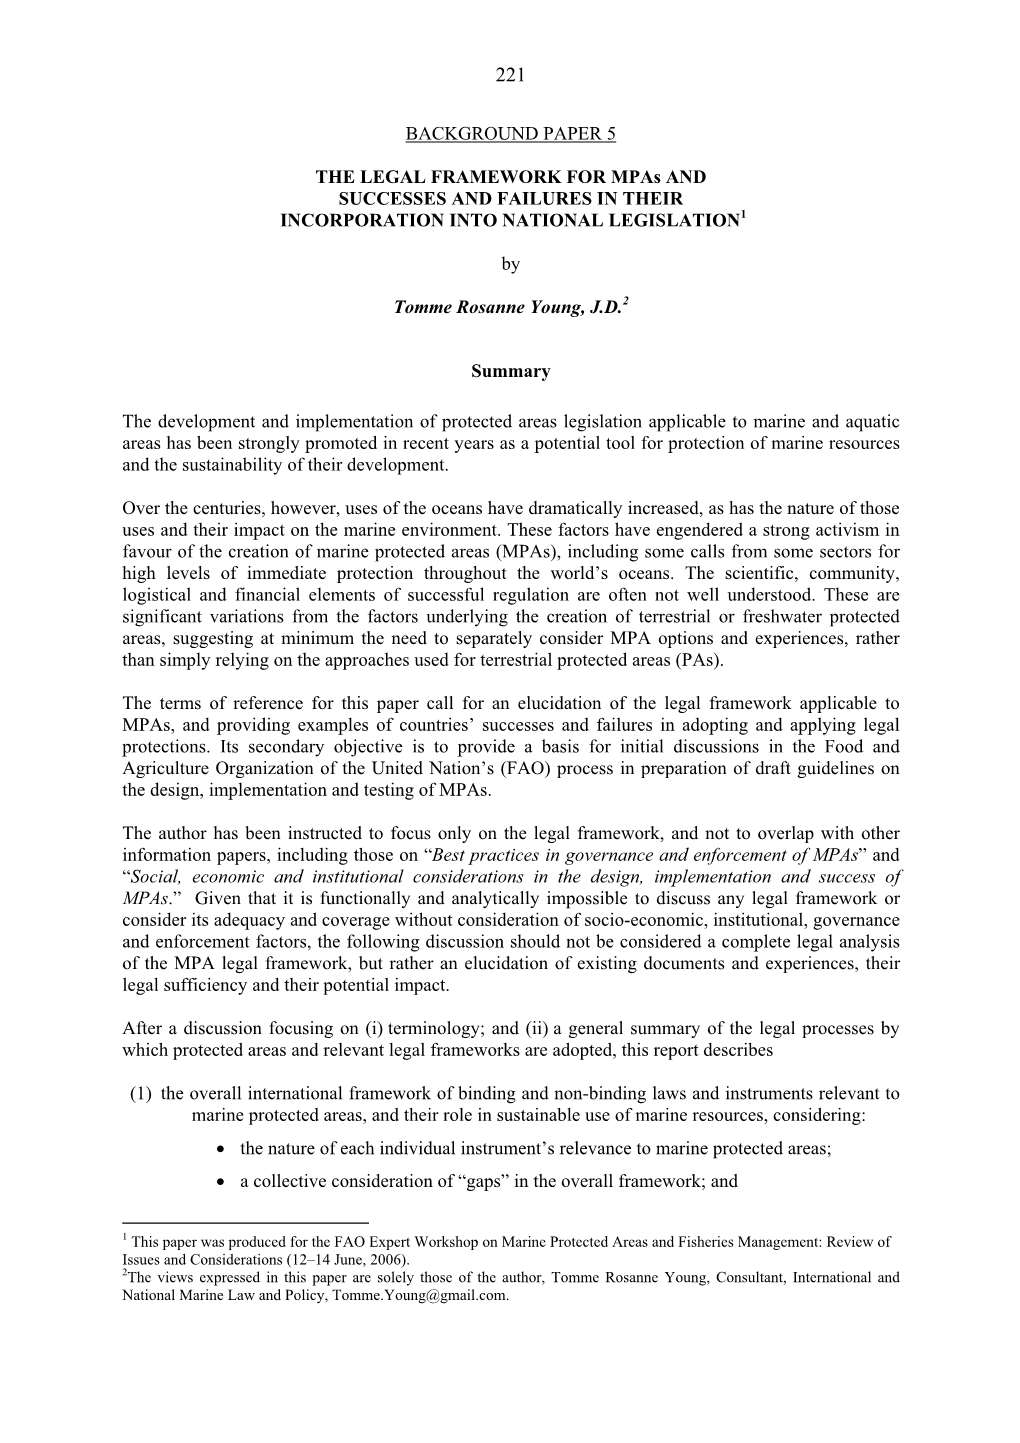 BACKGROUND PAPER 5 the LEGAL FRAMEWORK for Mpas